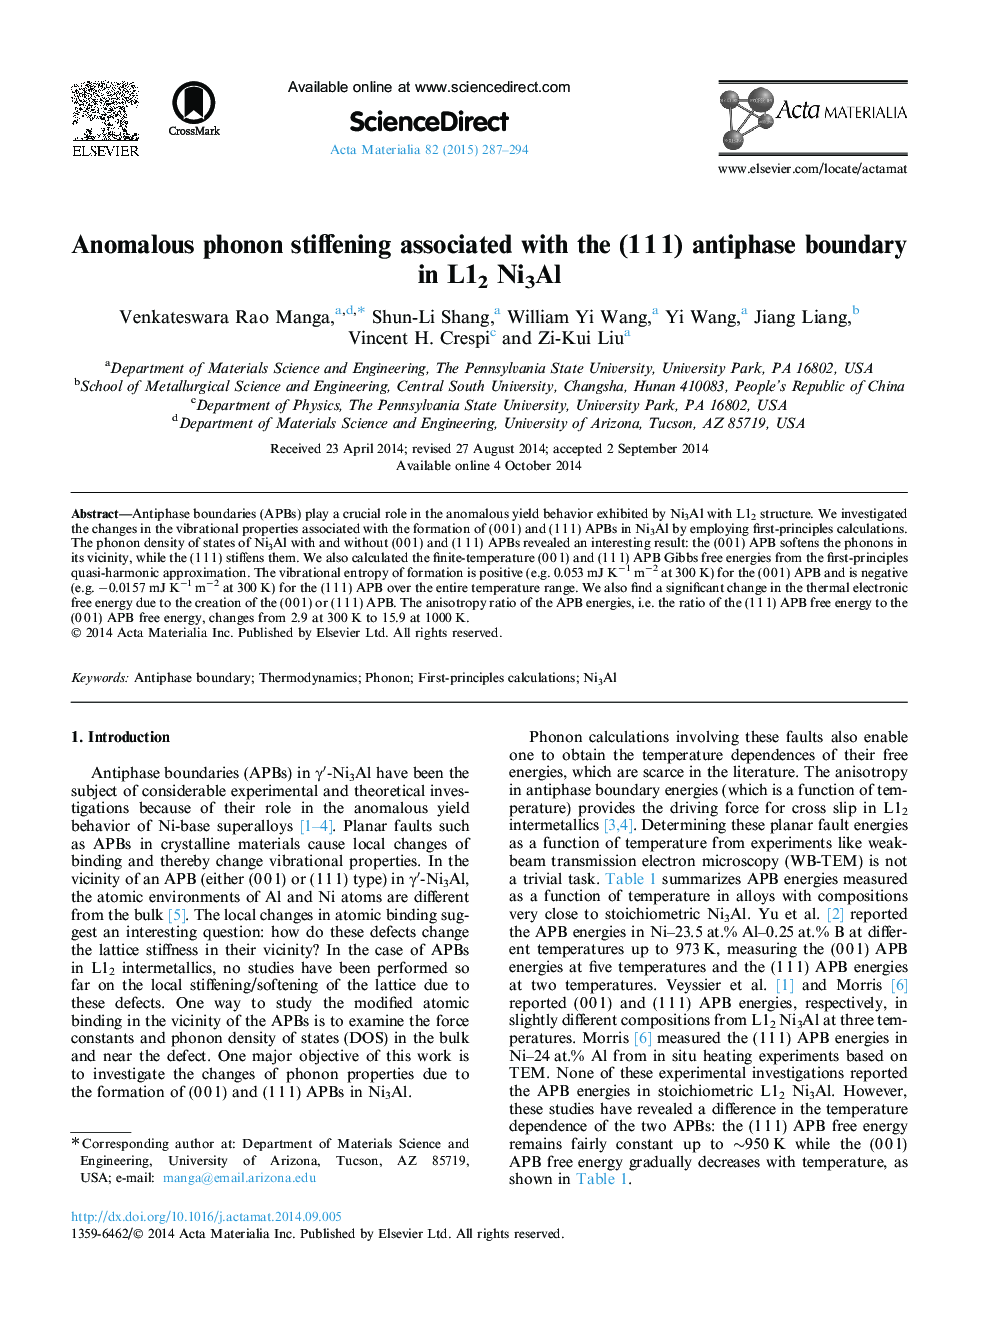 Anomalous phonon stiffening associated with the (1 1 1) antiphase boundary in L12 Ni3Al